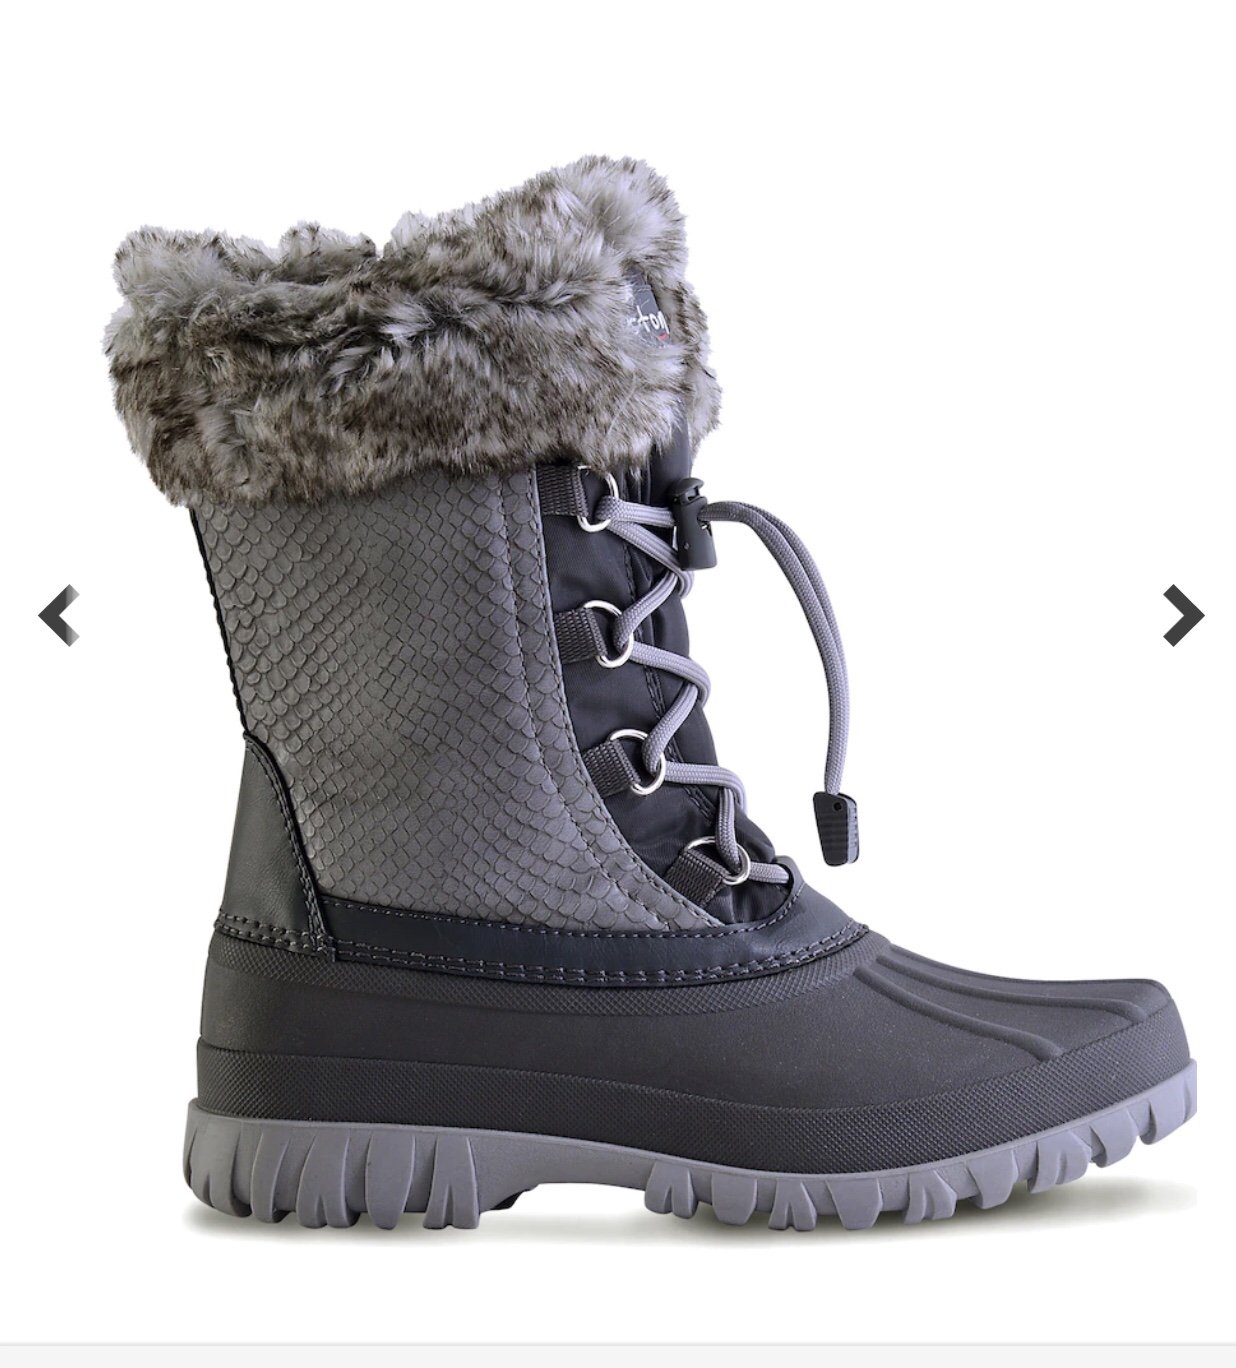 Boots Winter Women's — Alex and Lily's Shoe Shoppe